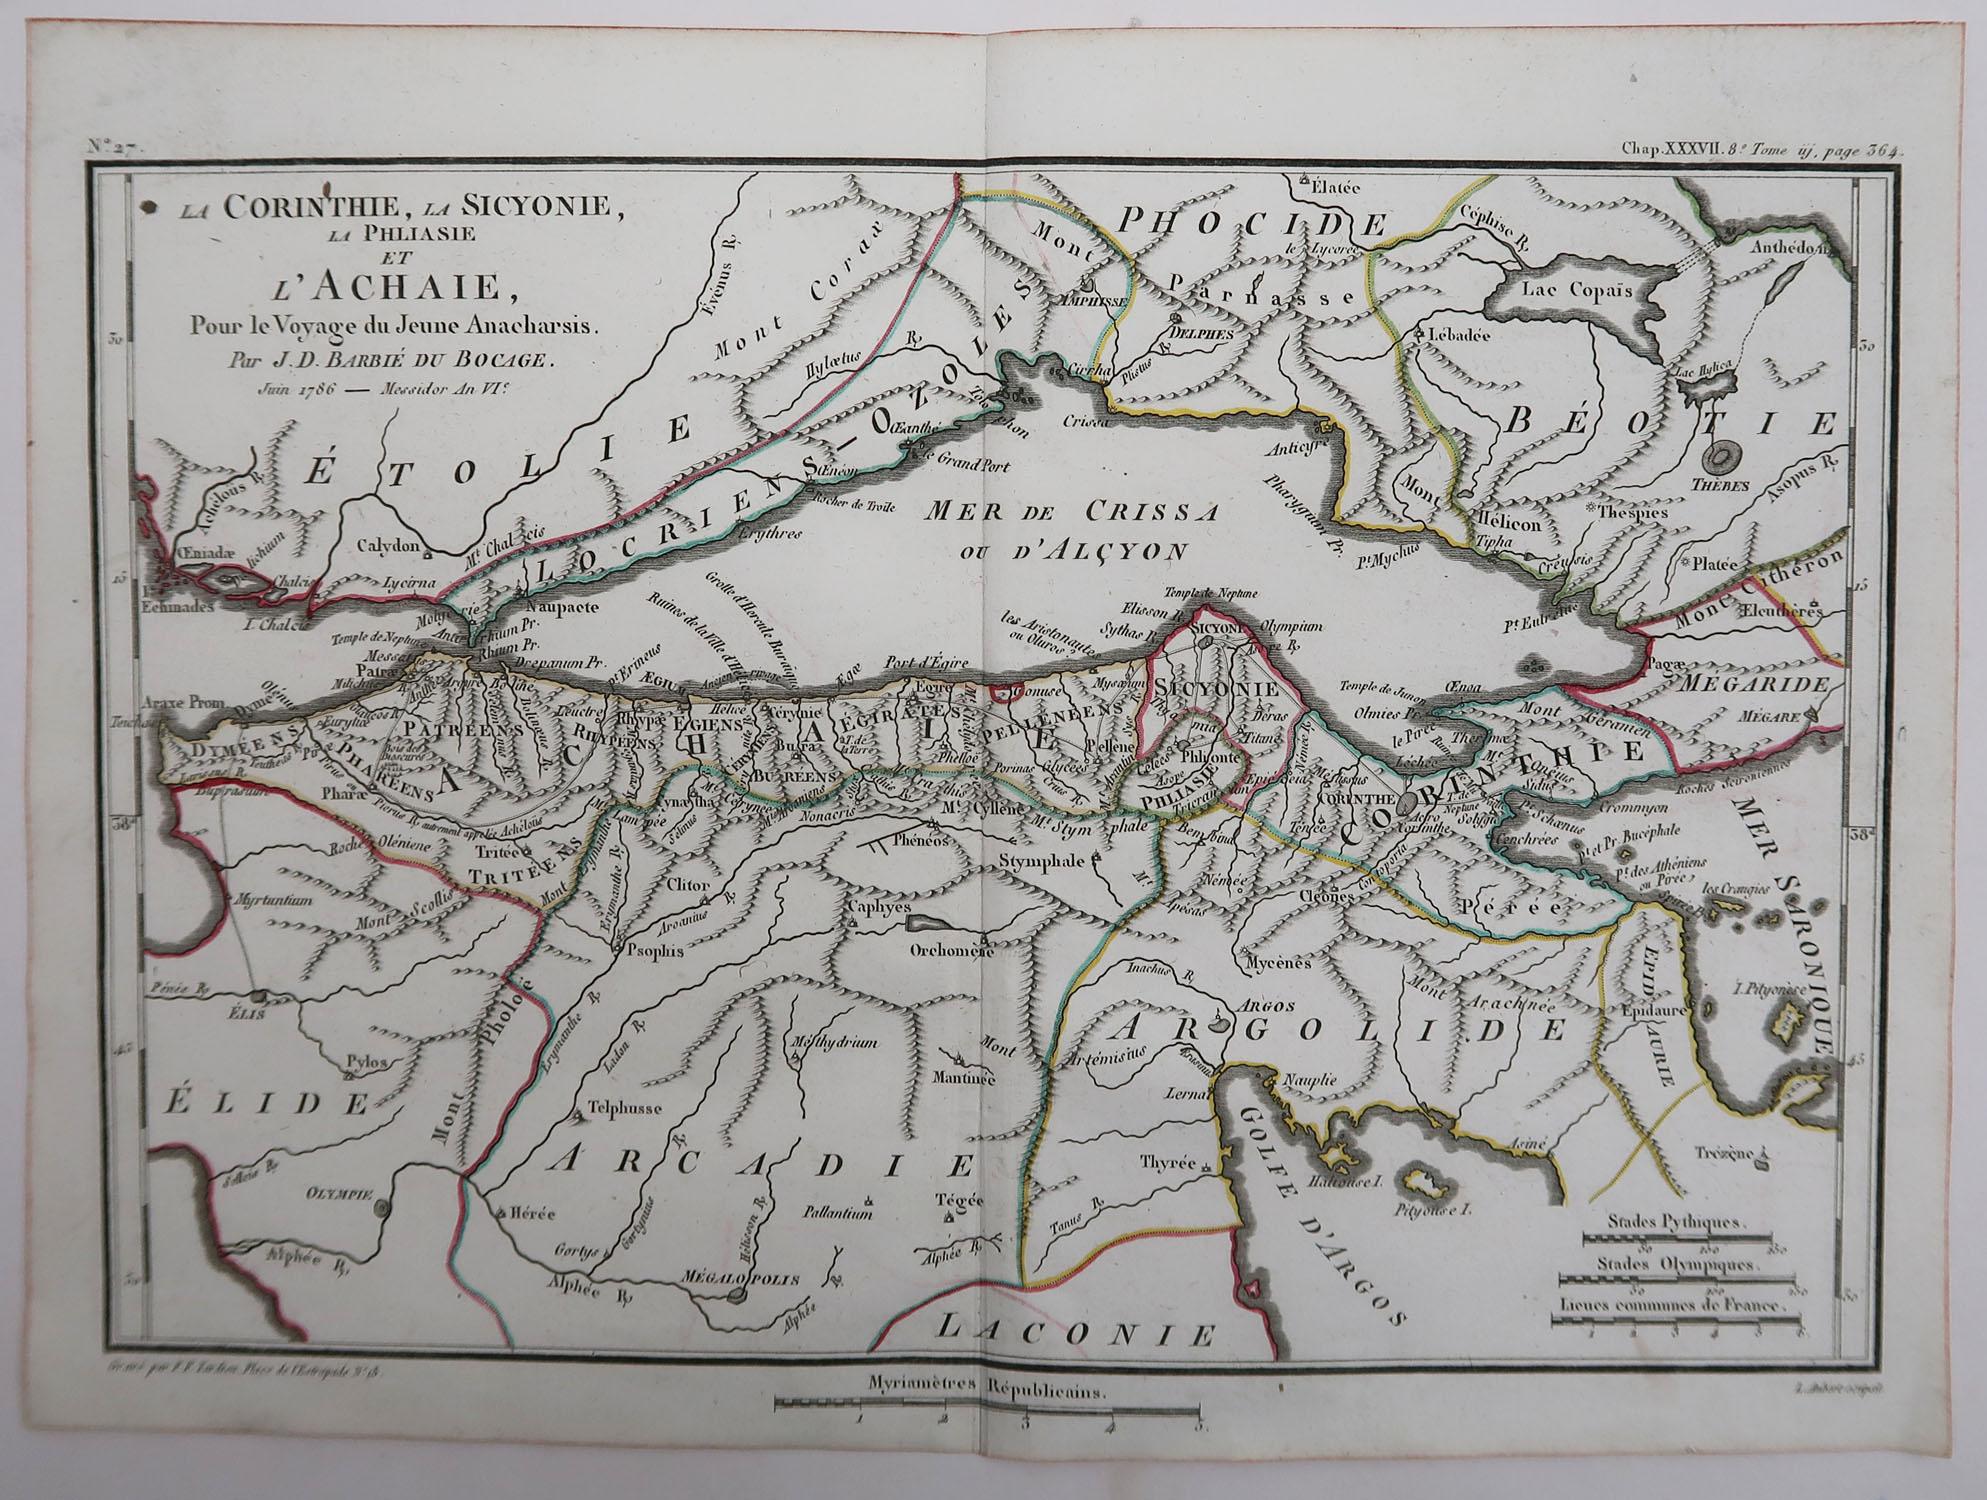 Other Original Antique Map of Ancient Greece, Achaia, Corinth, 1786